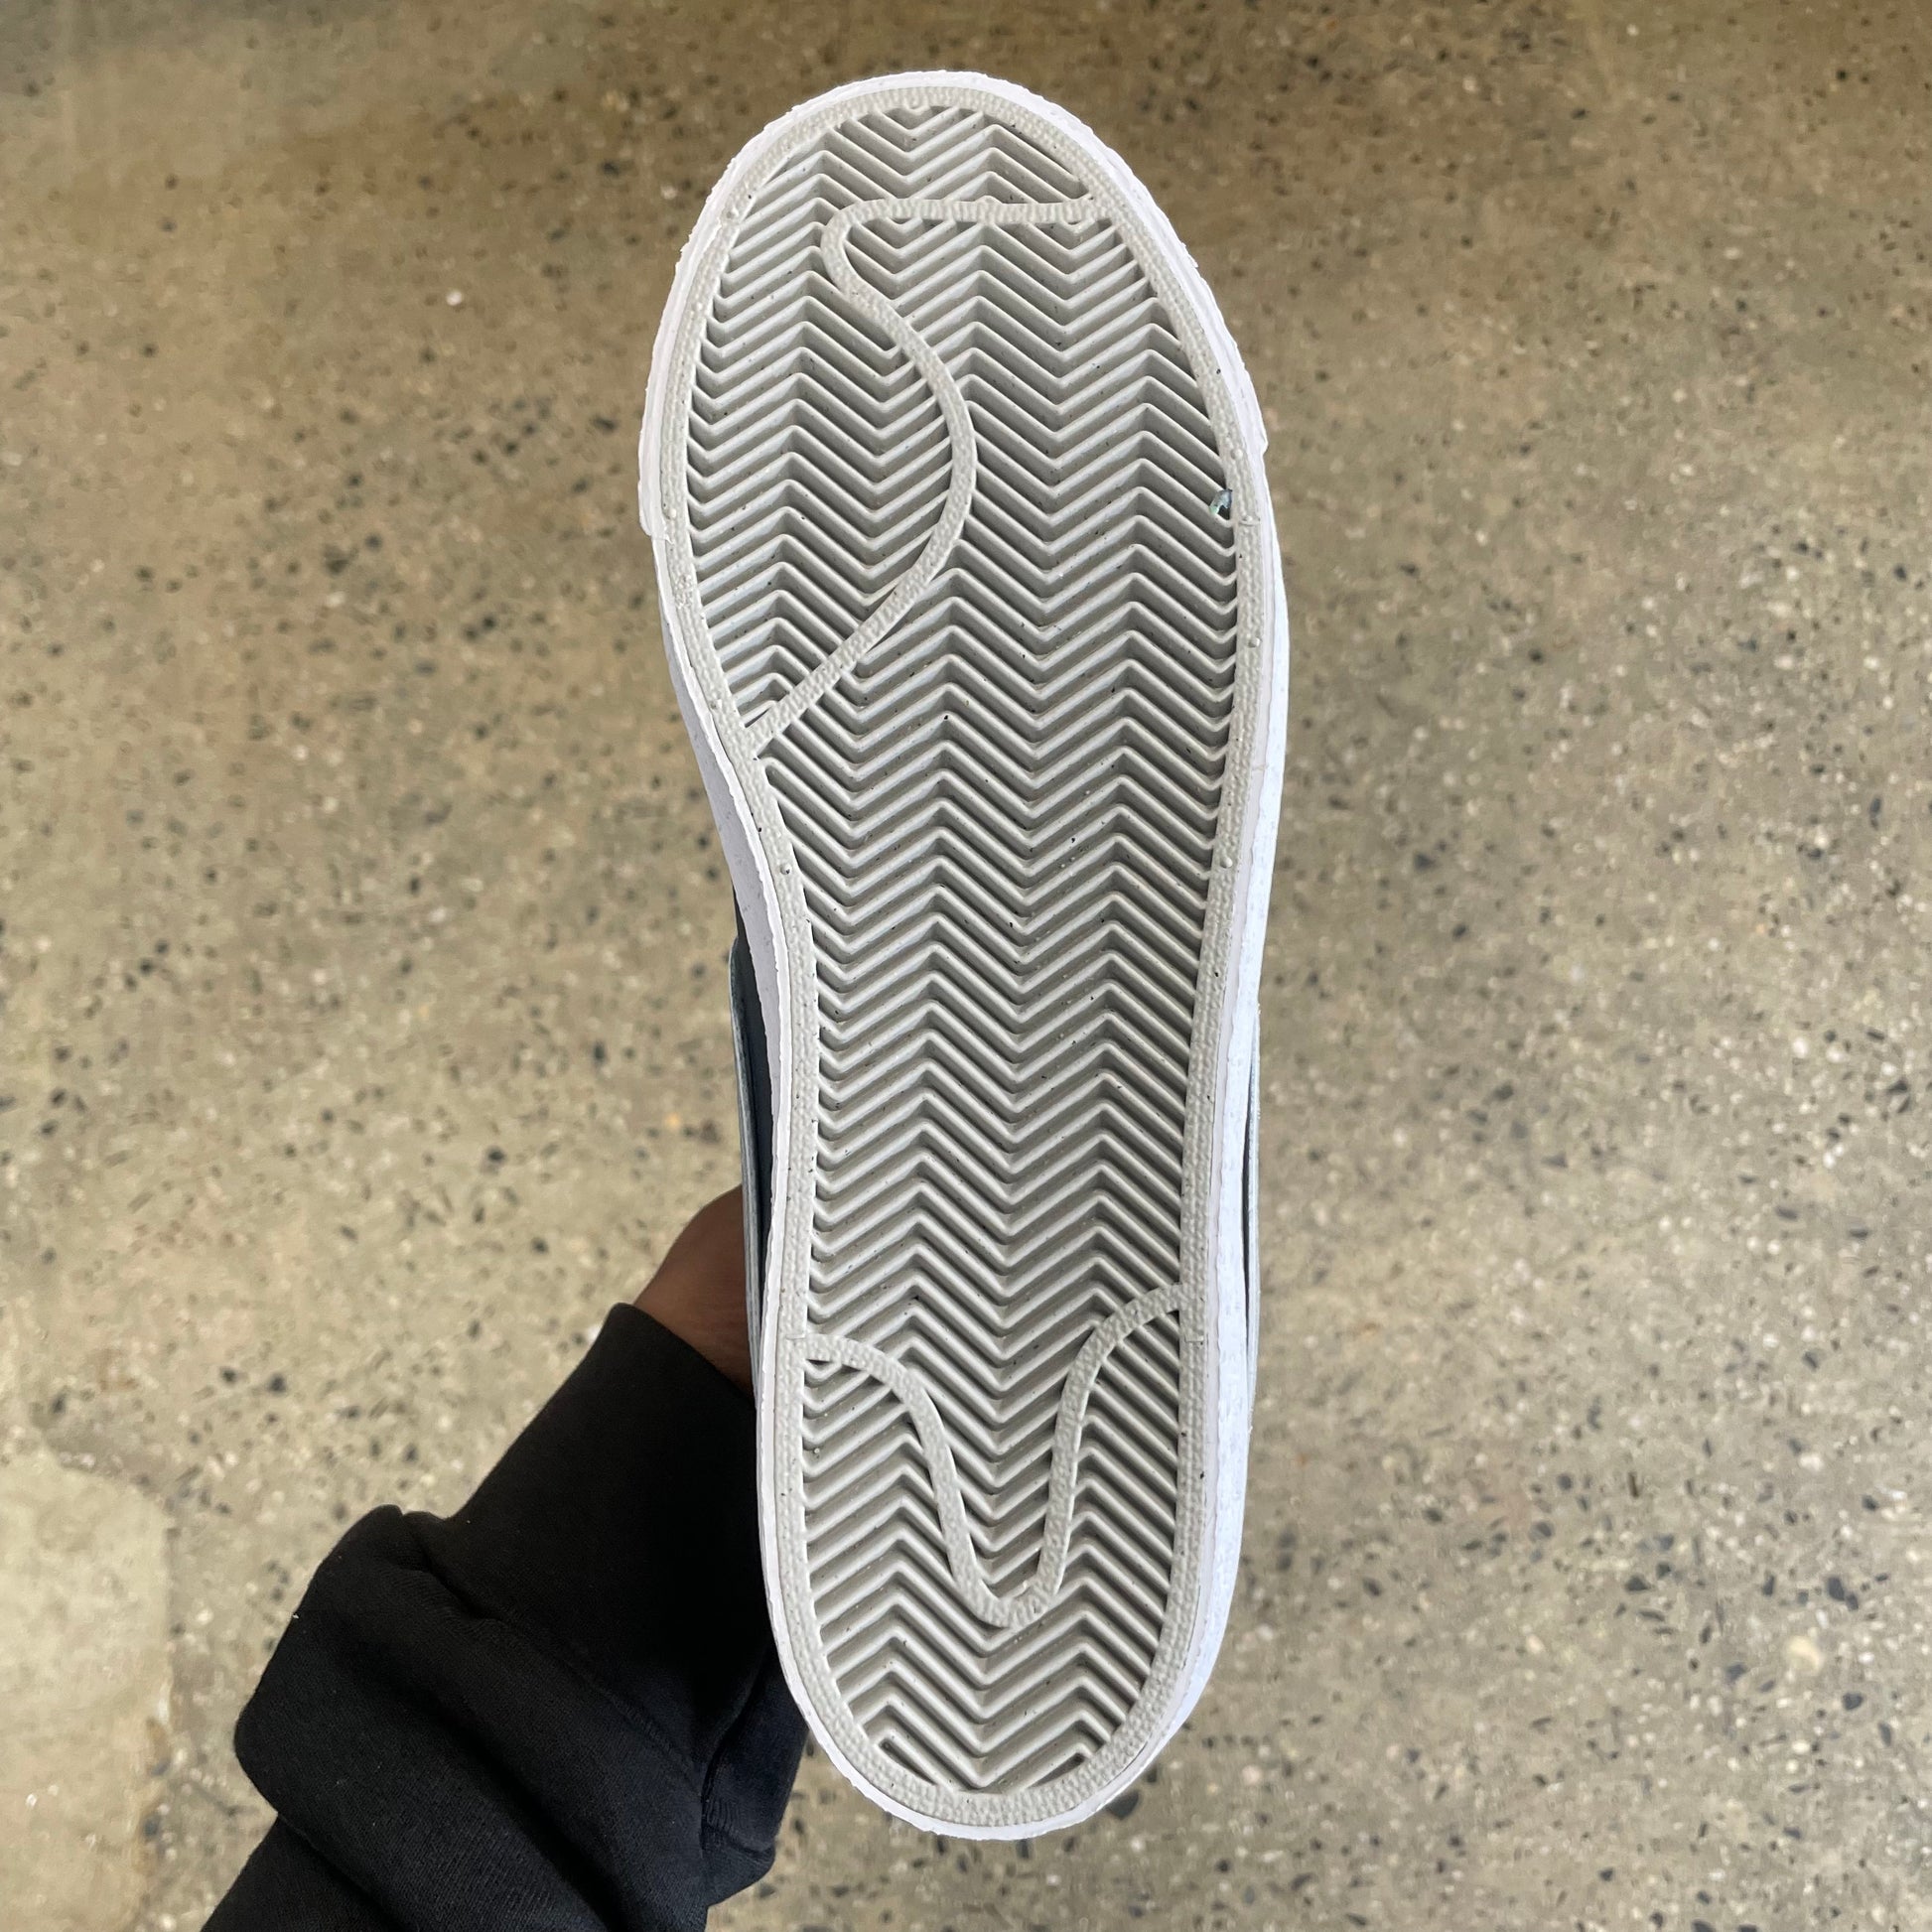 view of white gum rubber sole